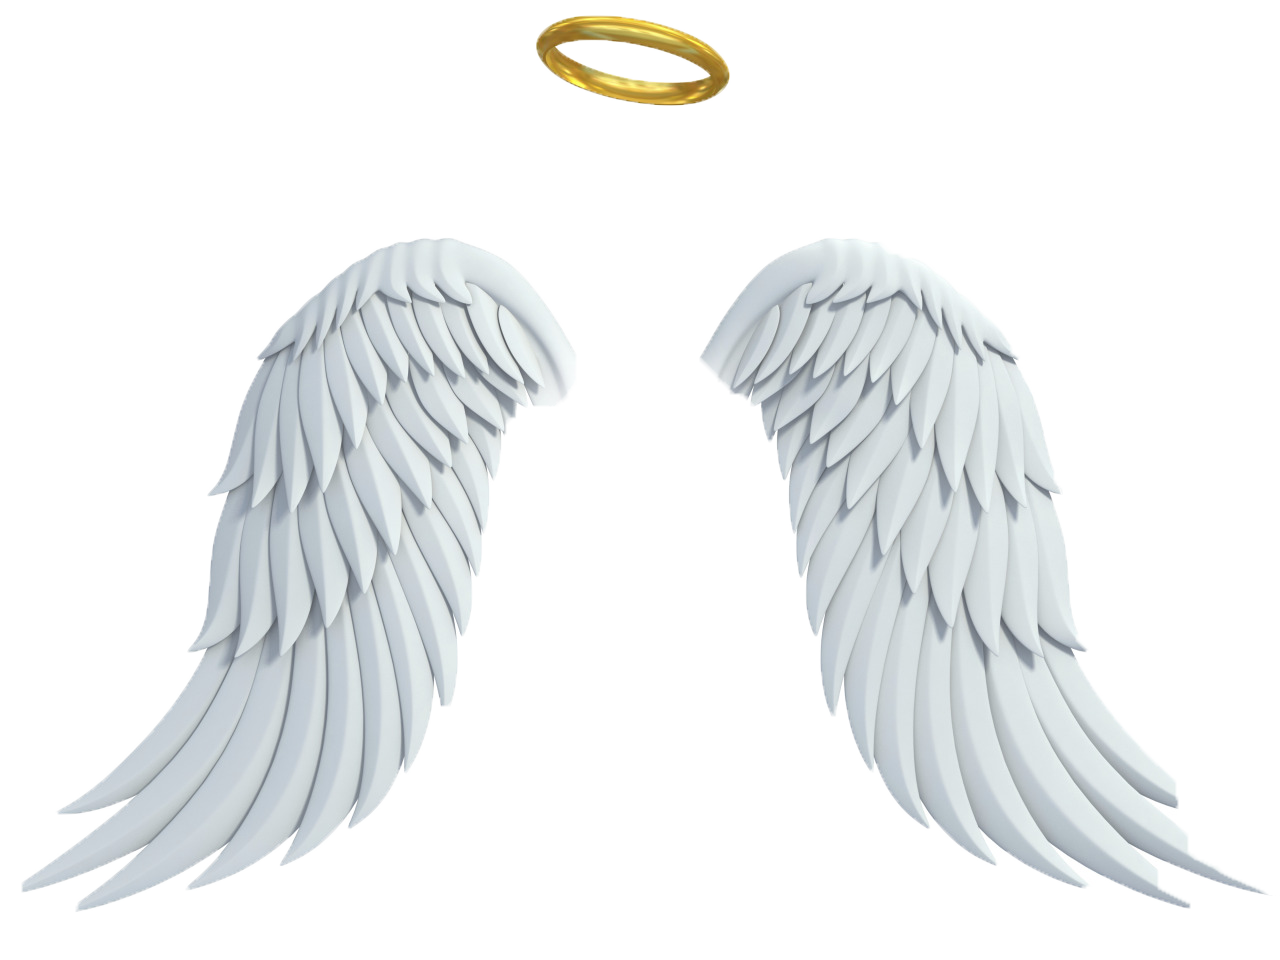 Angel Halo PNG Free Image - PNG All | PNG All